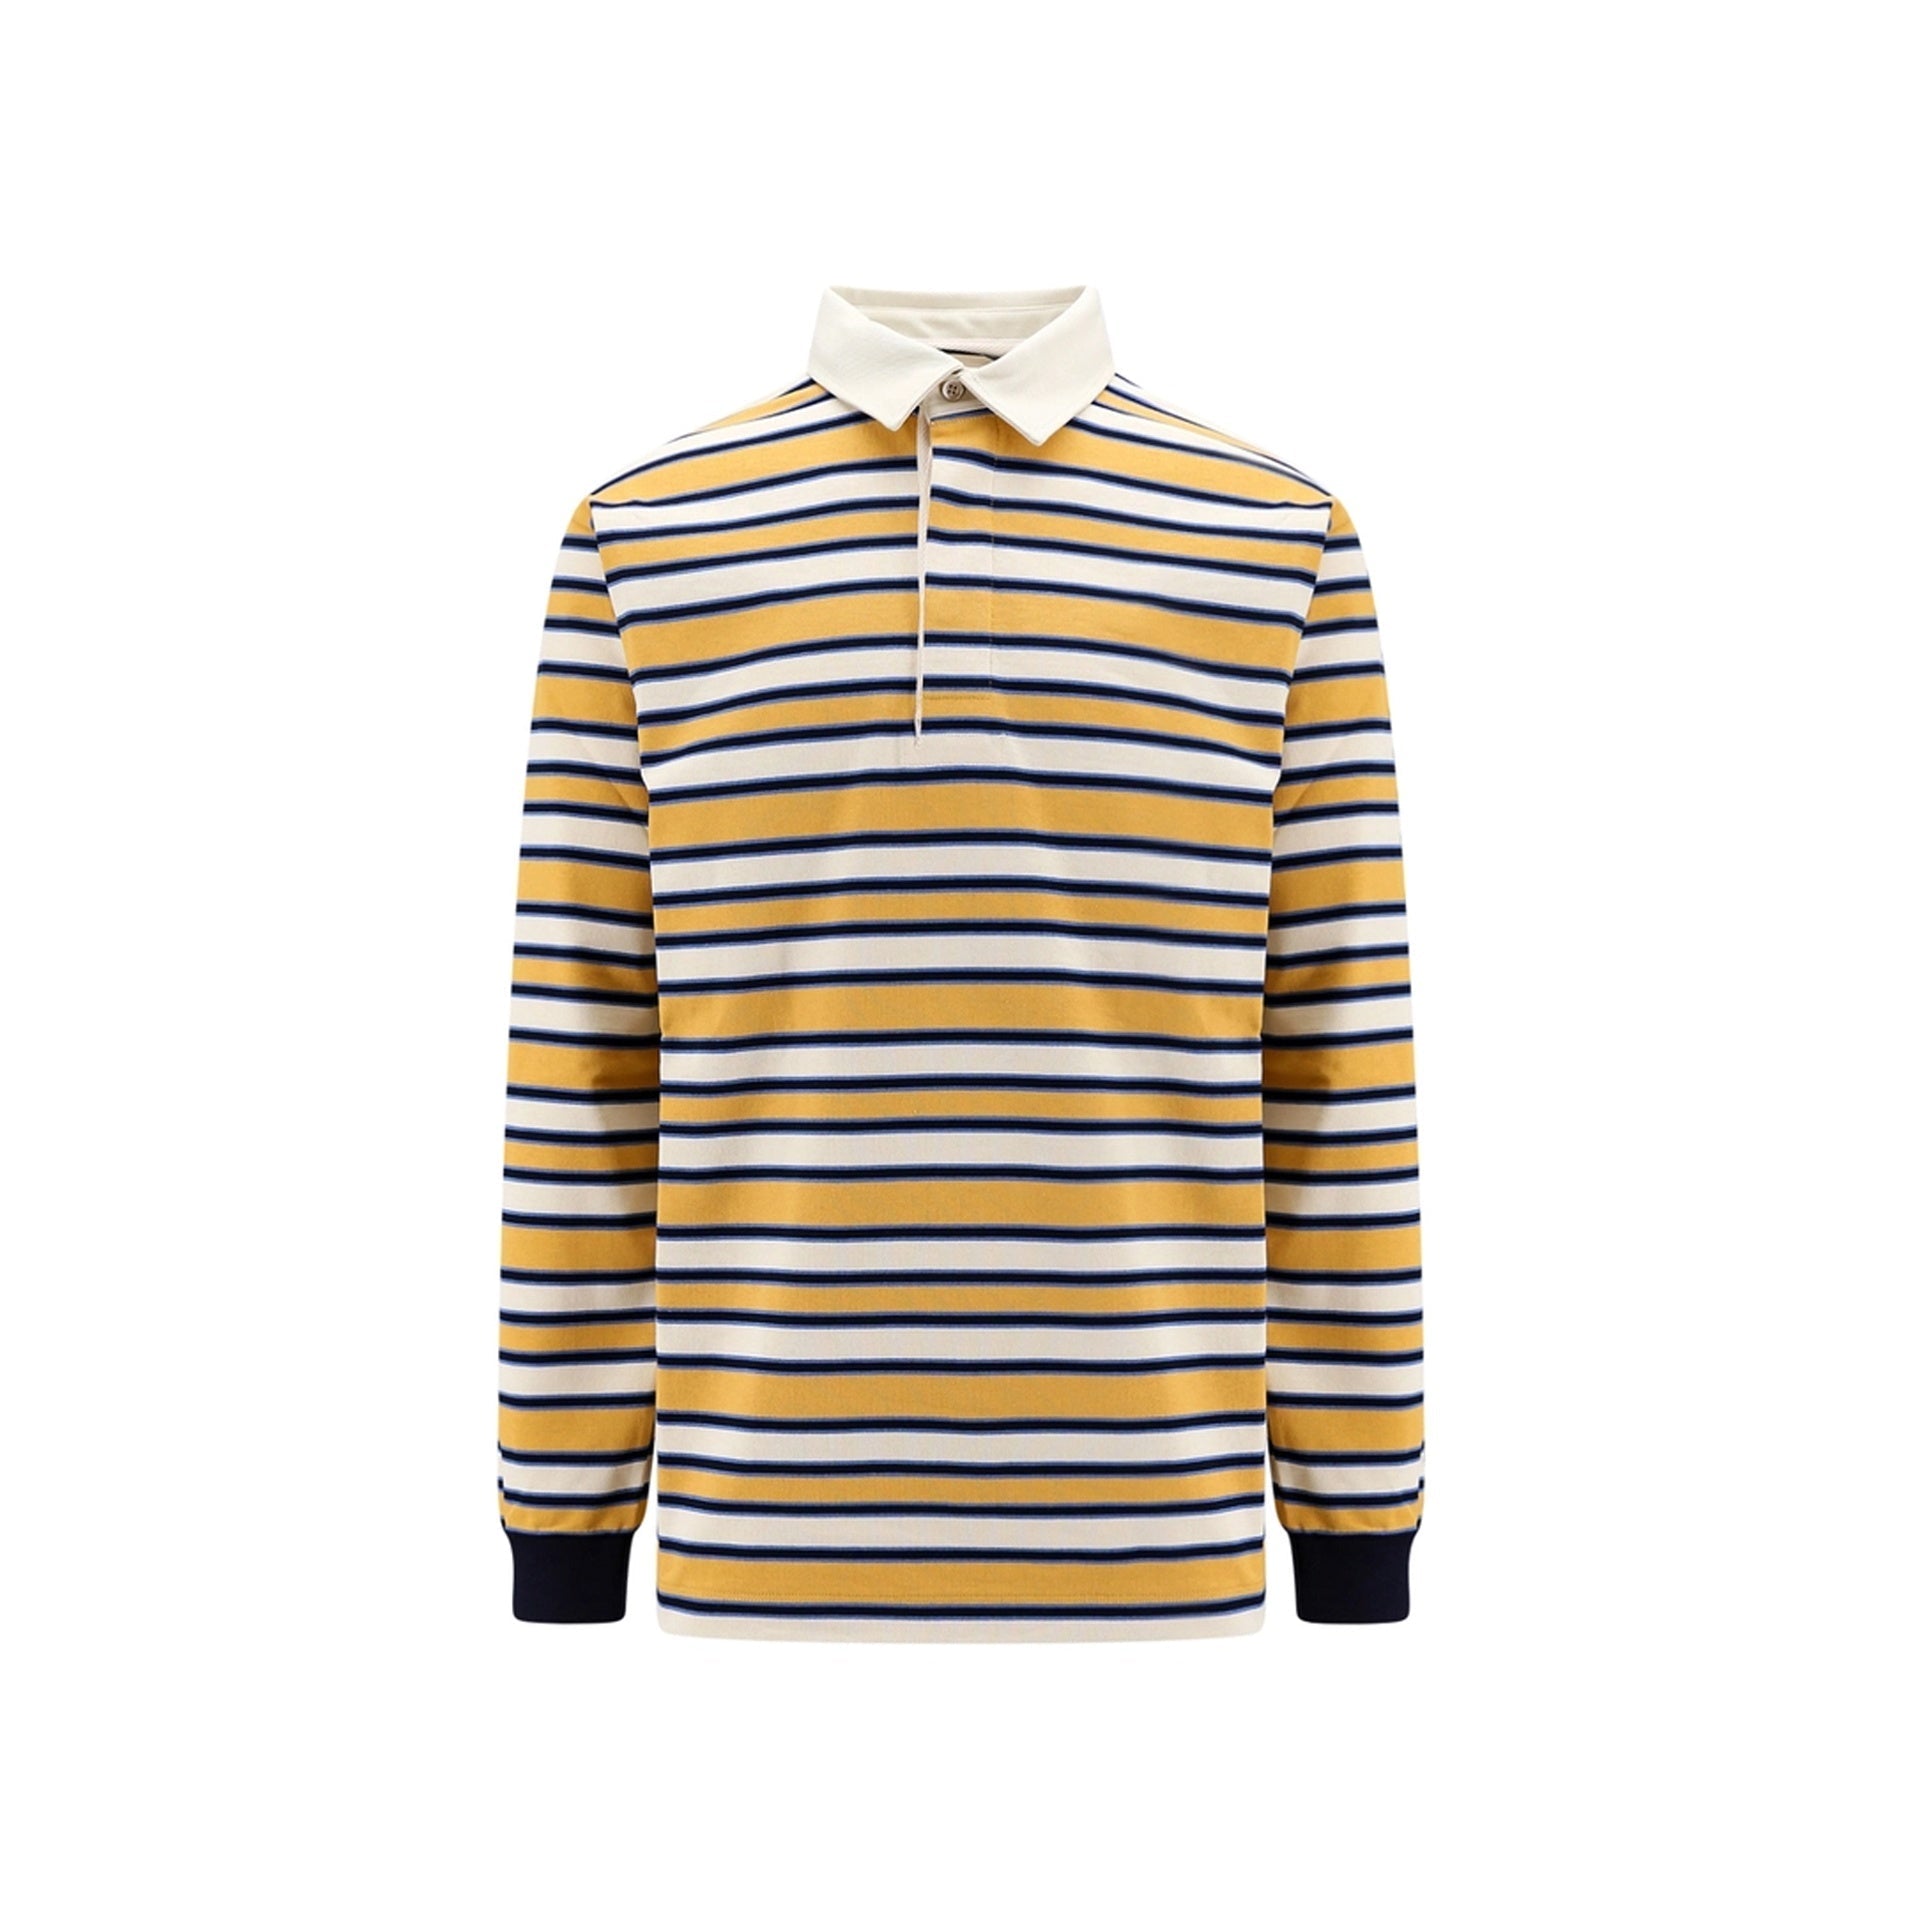 GUCCI-OUTLET-SALE-Gucci-Striped-Polo-Shirt-Shirts-YELLOW-M-ARCHIVE-COLLECTION.jpg